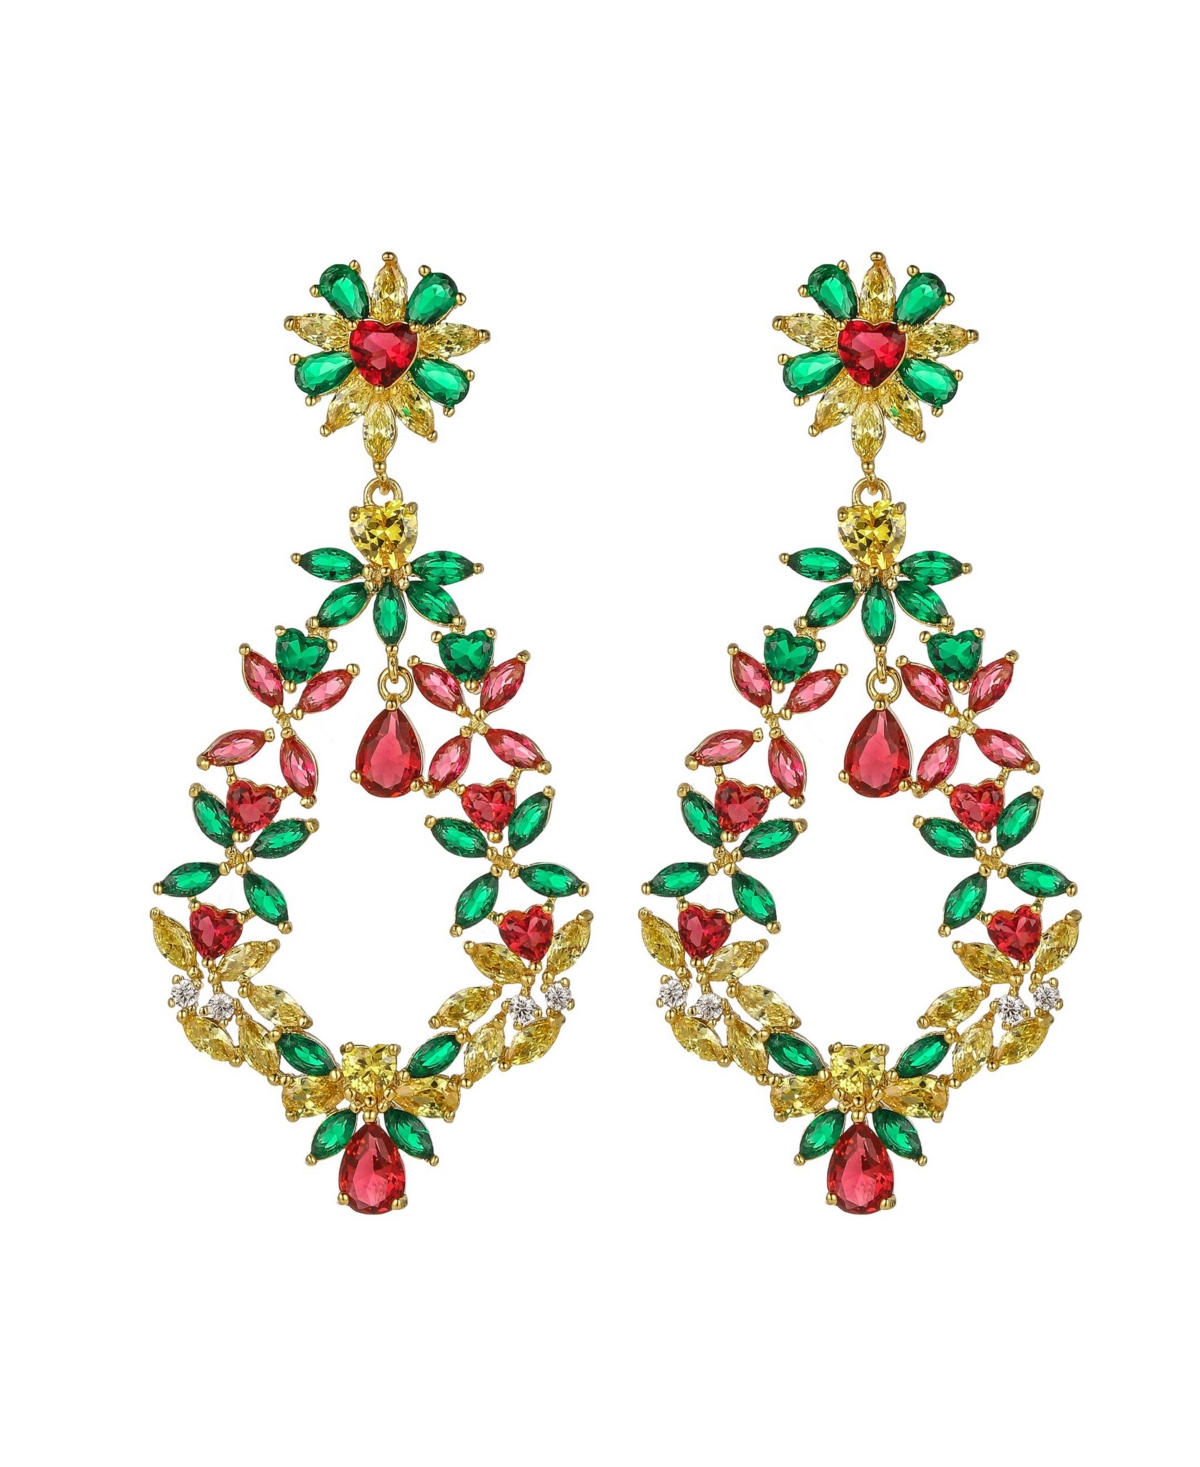 Gold-Tone Emerald and Ruby Accent Earrings - Gold-Tone